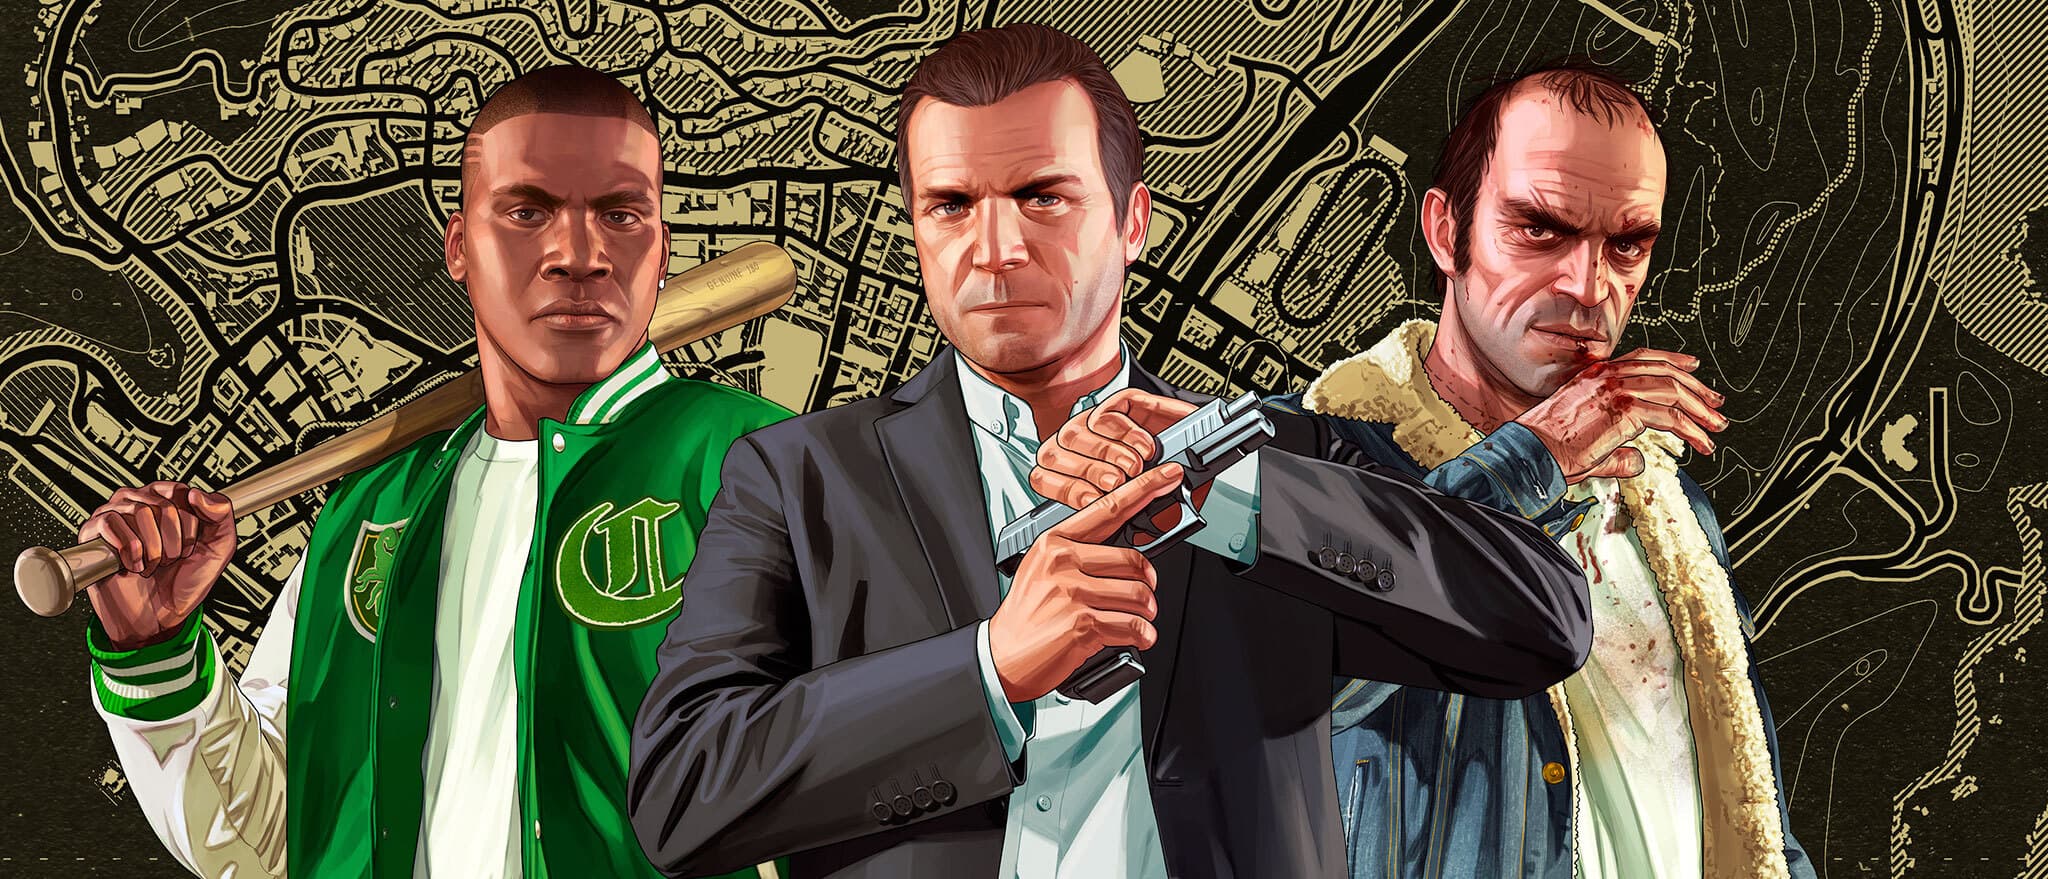 Buy Grand Theft Auto V: Premium Edition, PC, Official Store